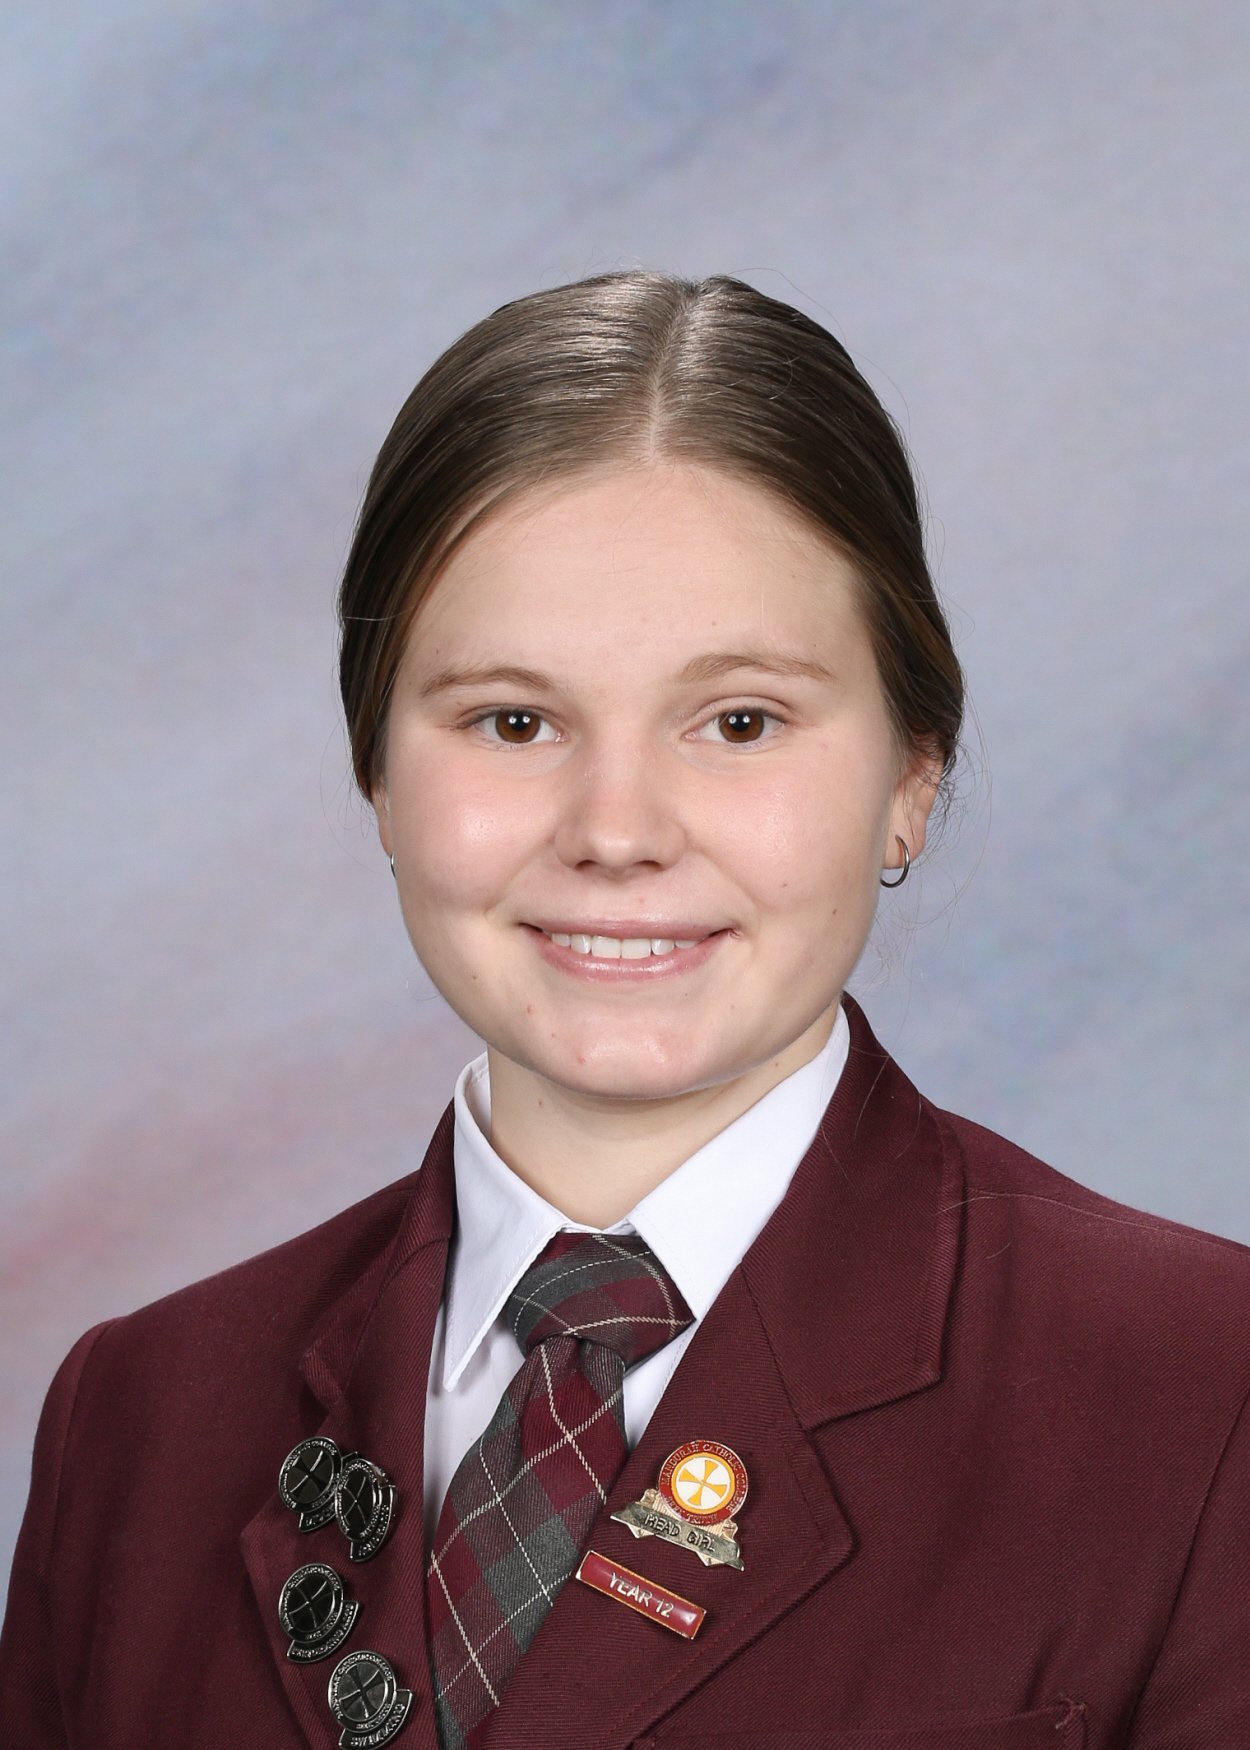 Holy Family Medal - Indi McClements 